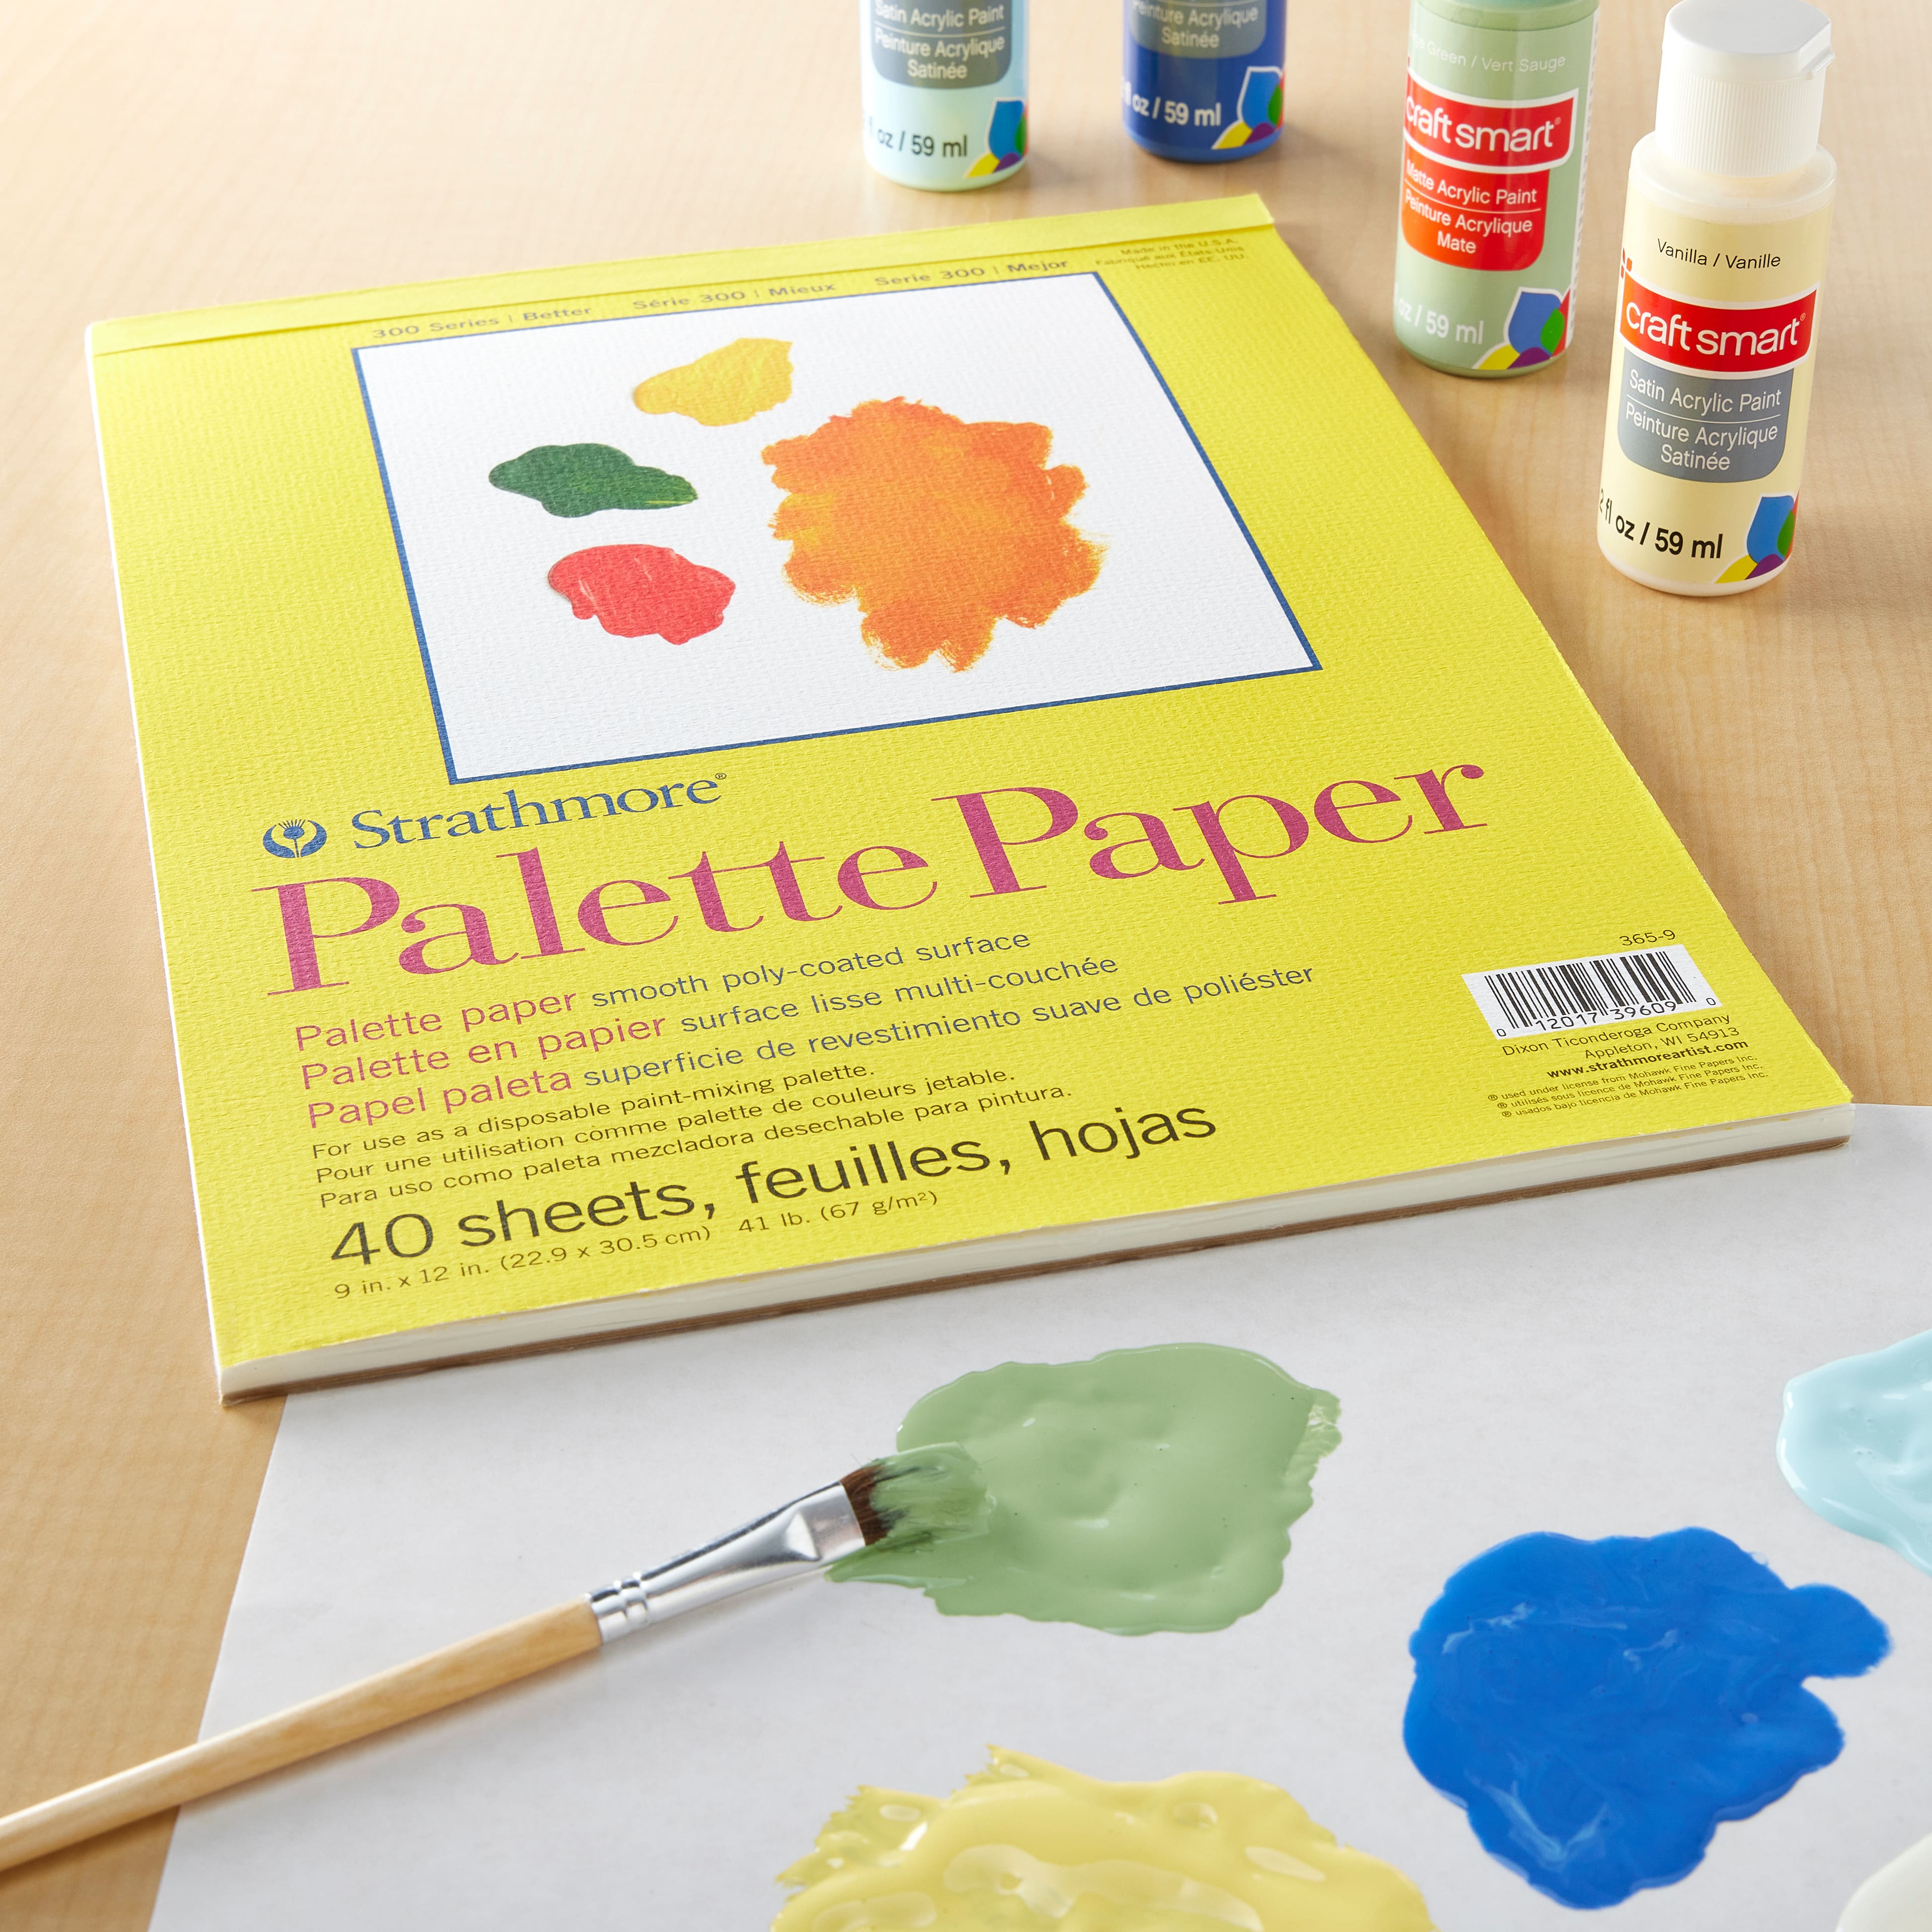 Strathmore 300 Series Palette Paper, 12 x 16” ART 40 Sheets. Smooth Poly  Covered